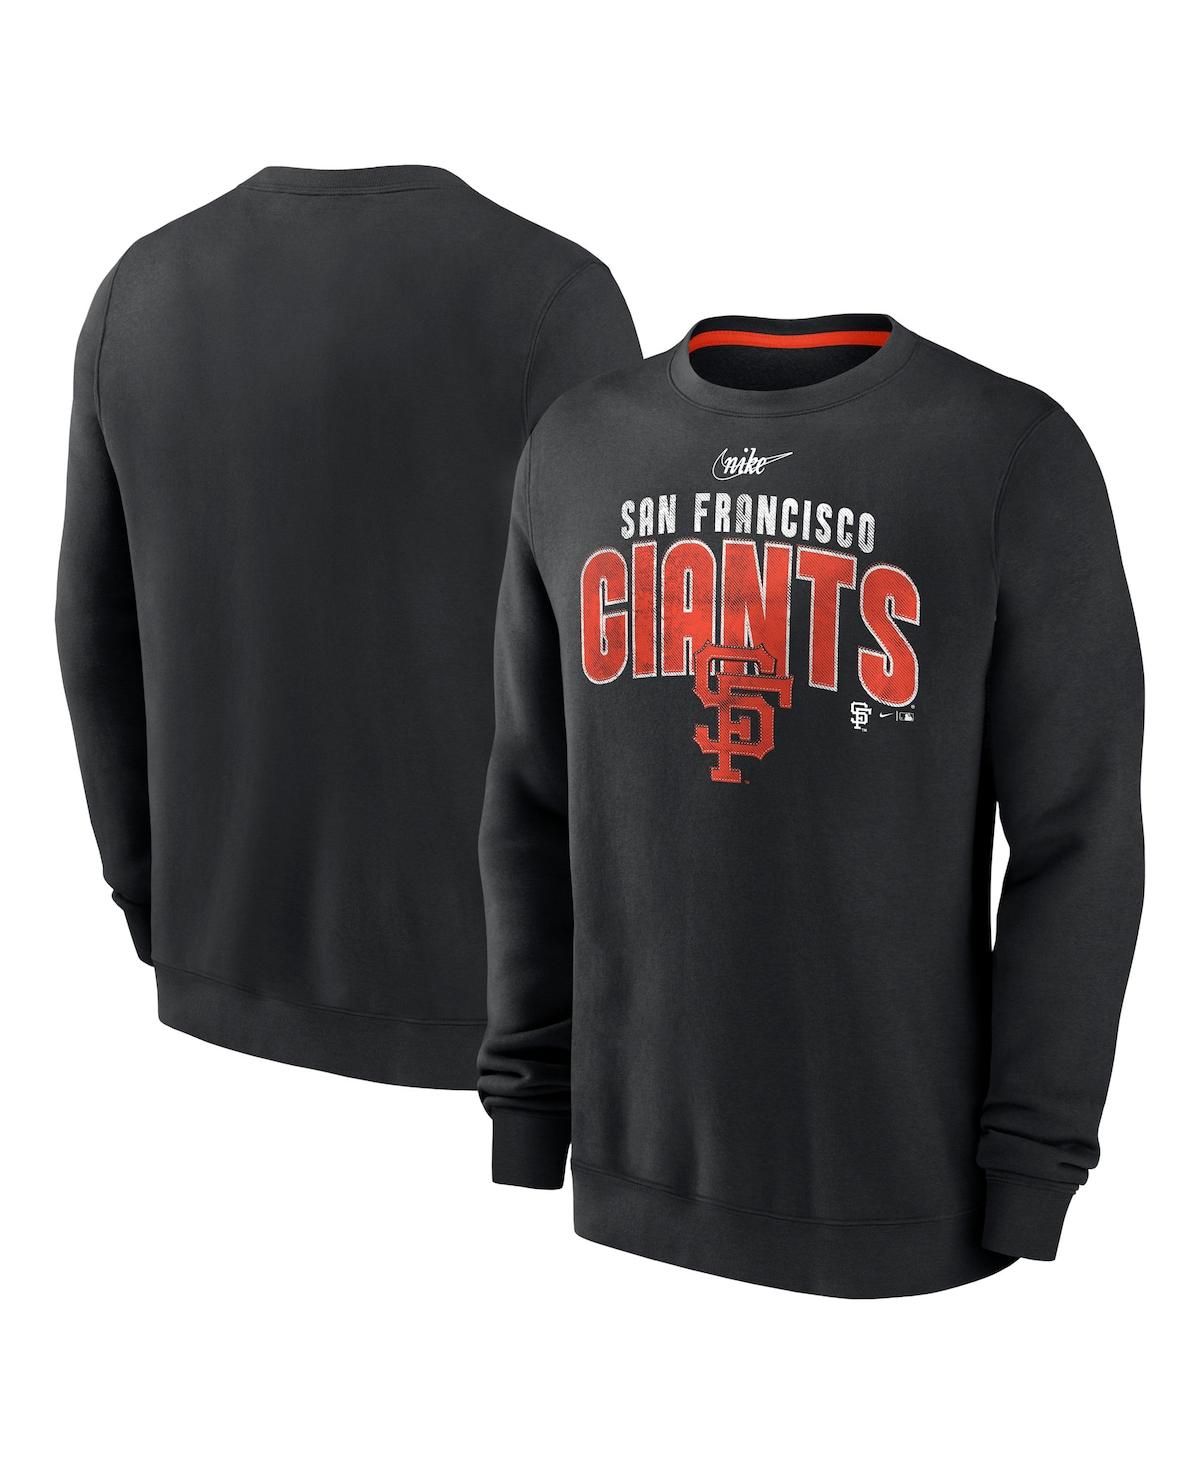 Nike Men's  Black San Francisco Giants Cooperstown Collection Team Shout Out Pullover Sweatshirt